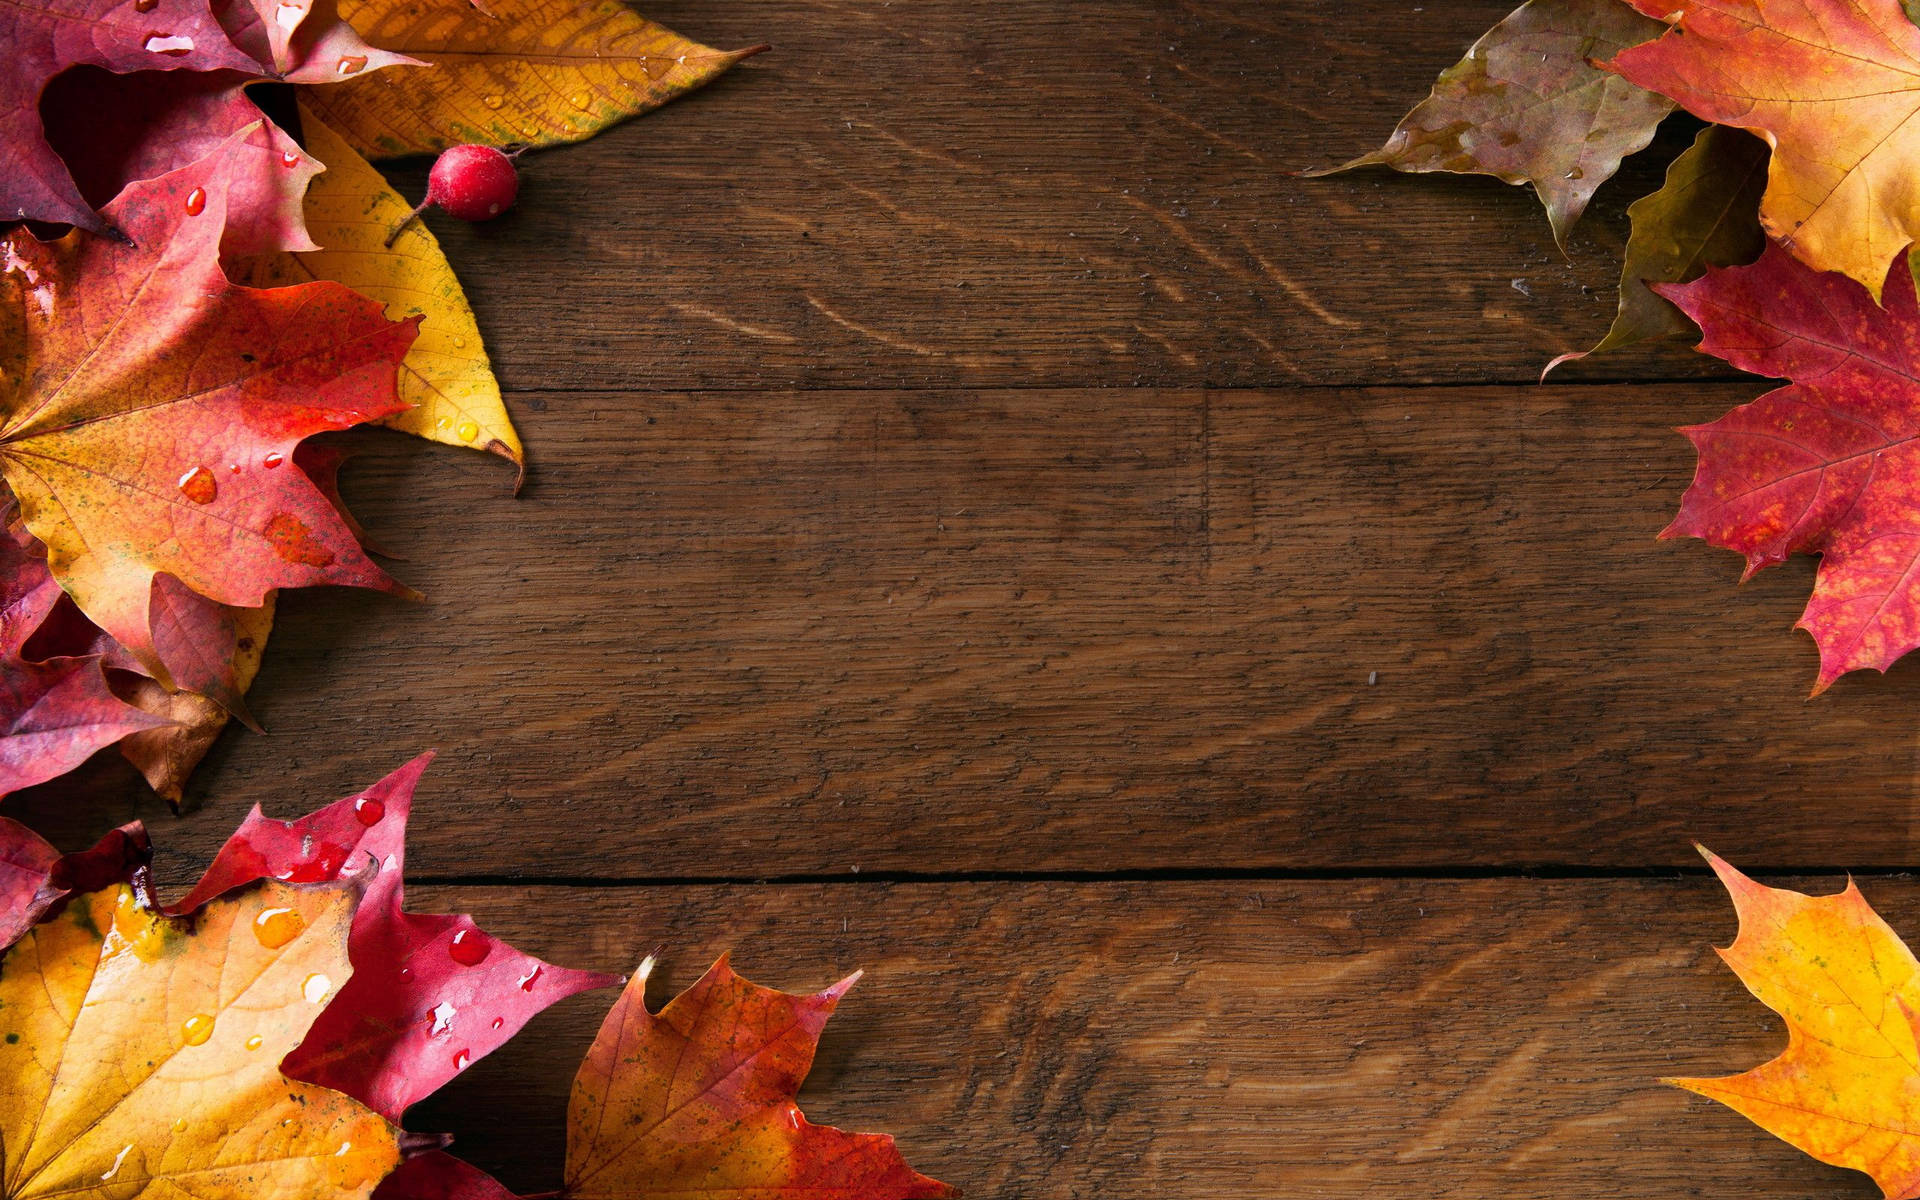 Aesthetic Fall Wood With Maple Leaves Background